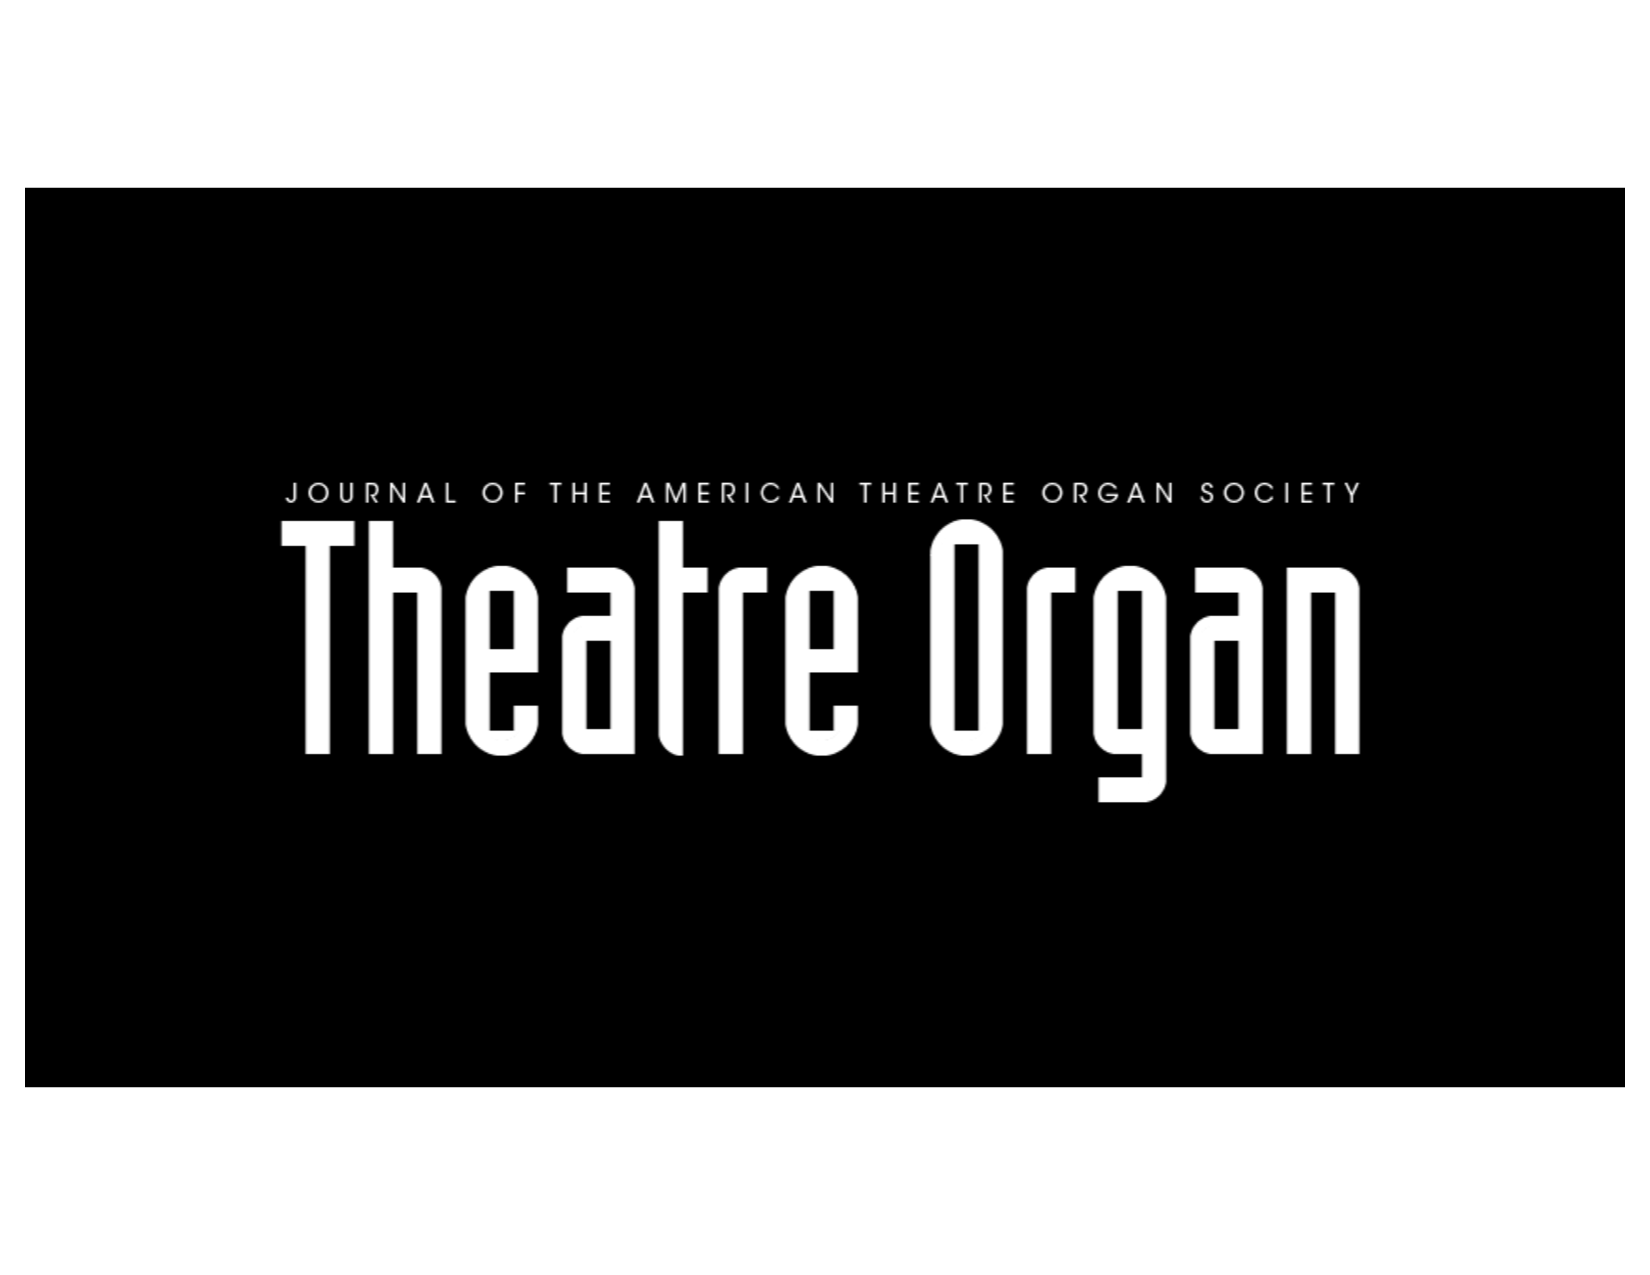 Theatre organ logo with words in white on black background